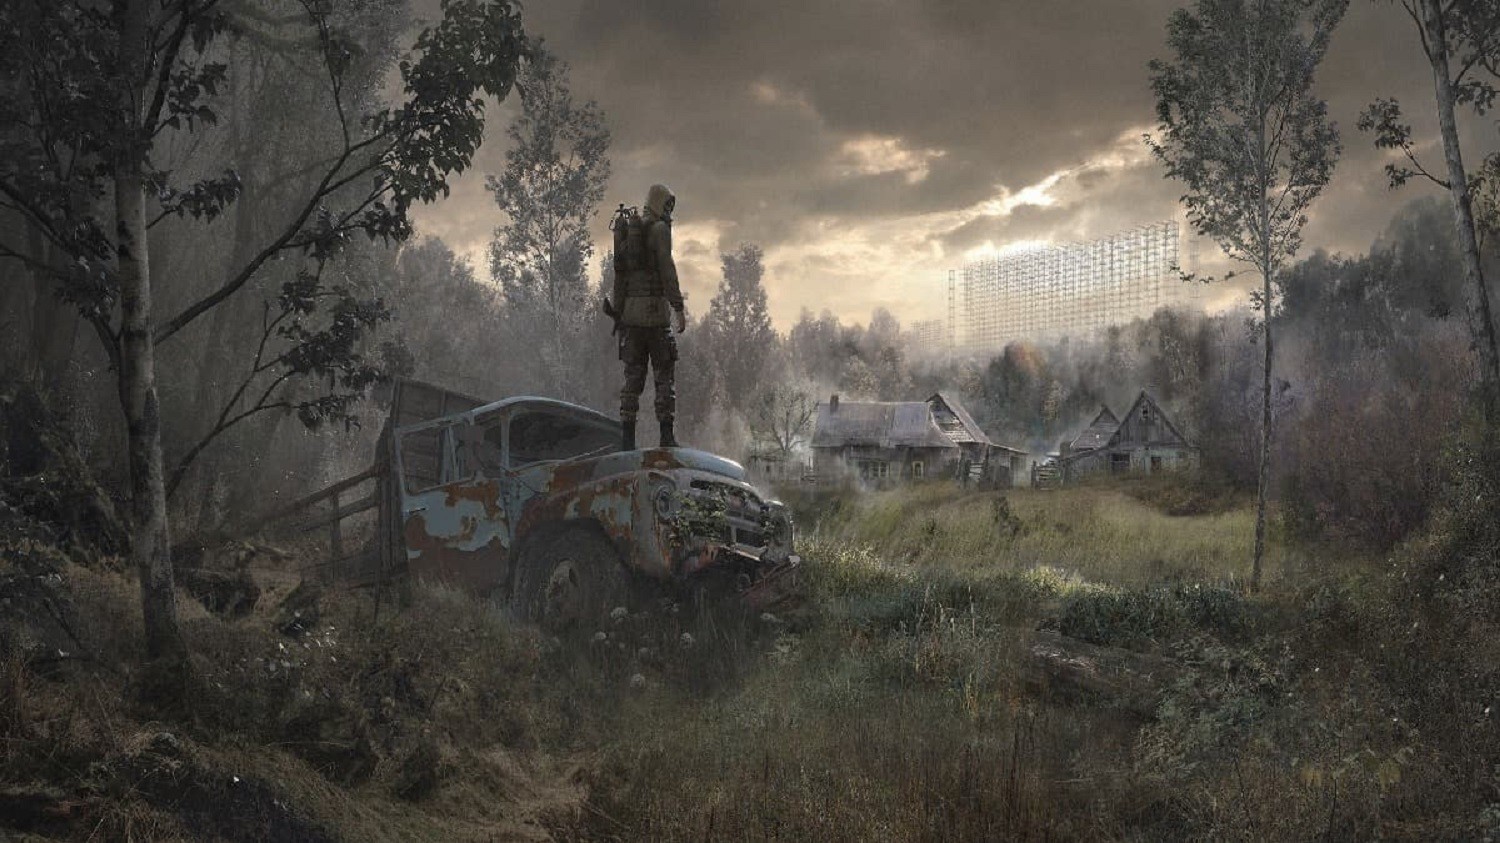 As Stalker 2 is awarded 'Most Wanted' game, Ukrainian CEO says the